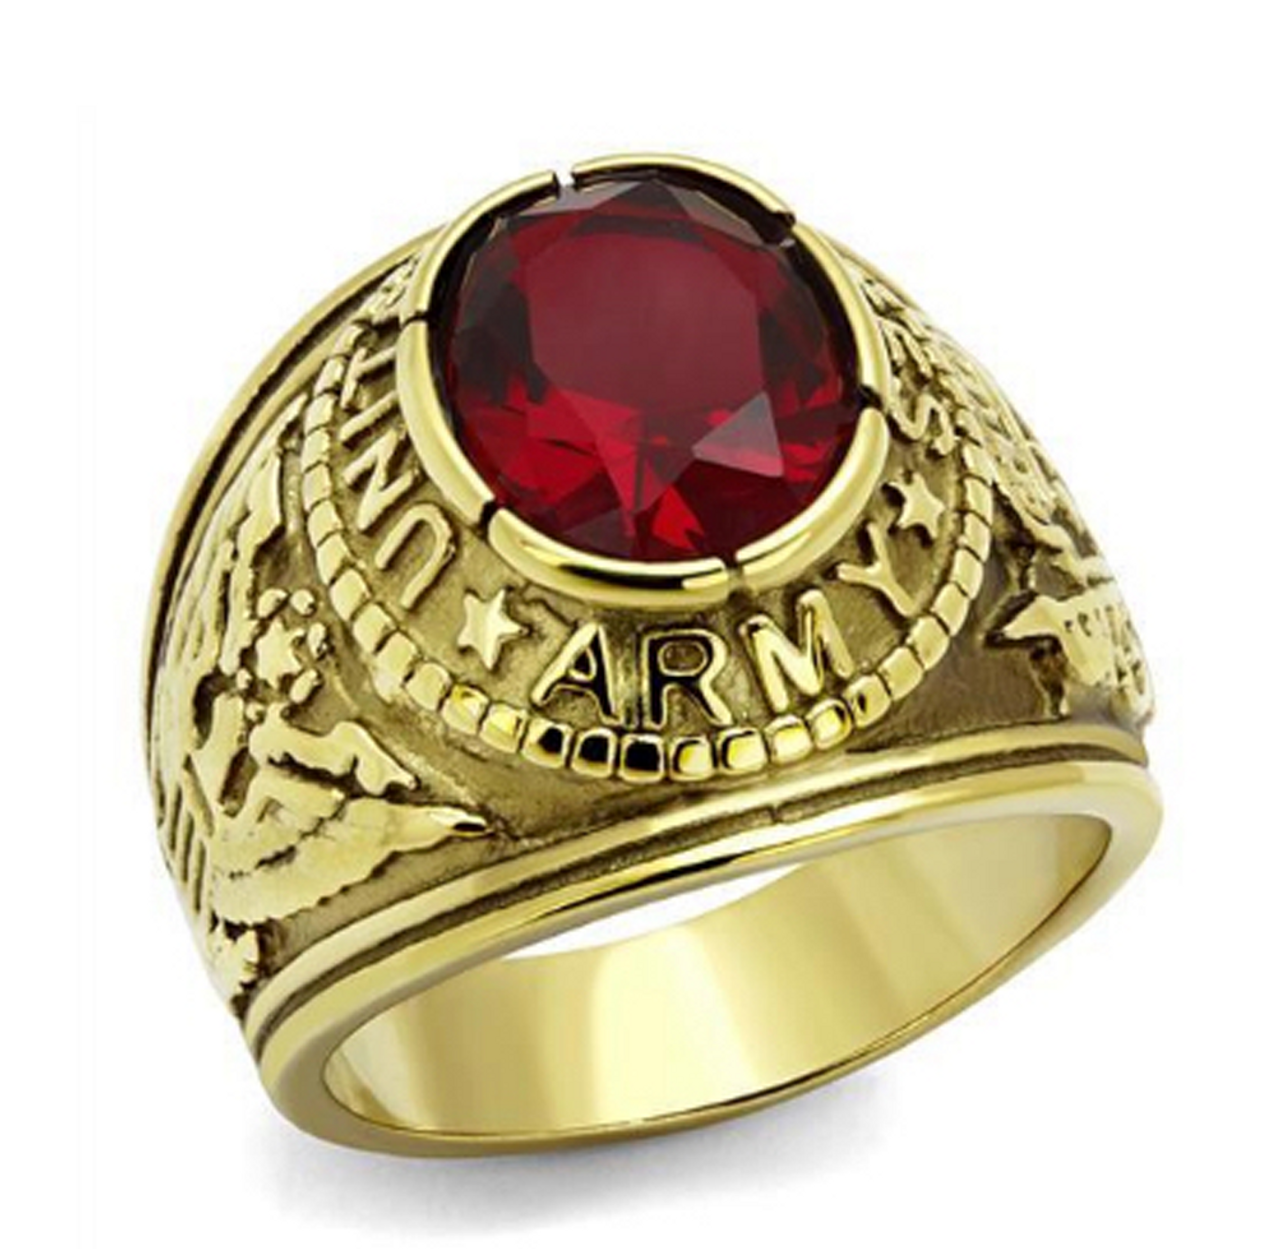 Army - U.S. Armed Forces Military Ring (Gold with Red Stone)